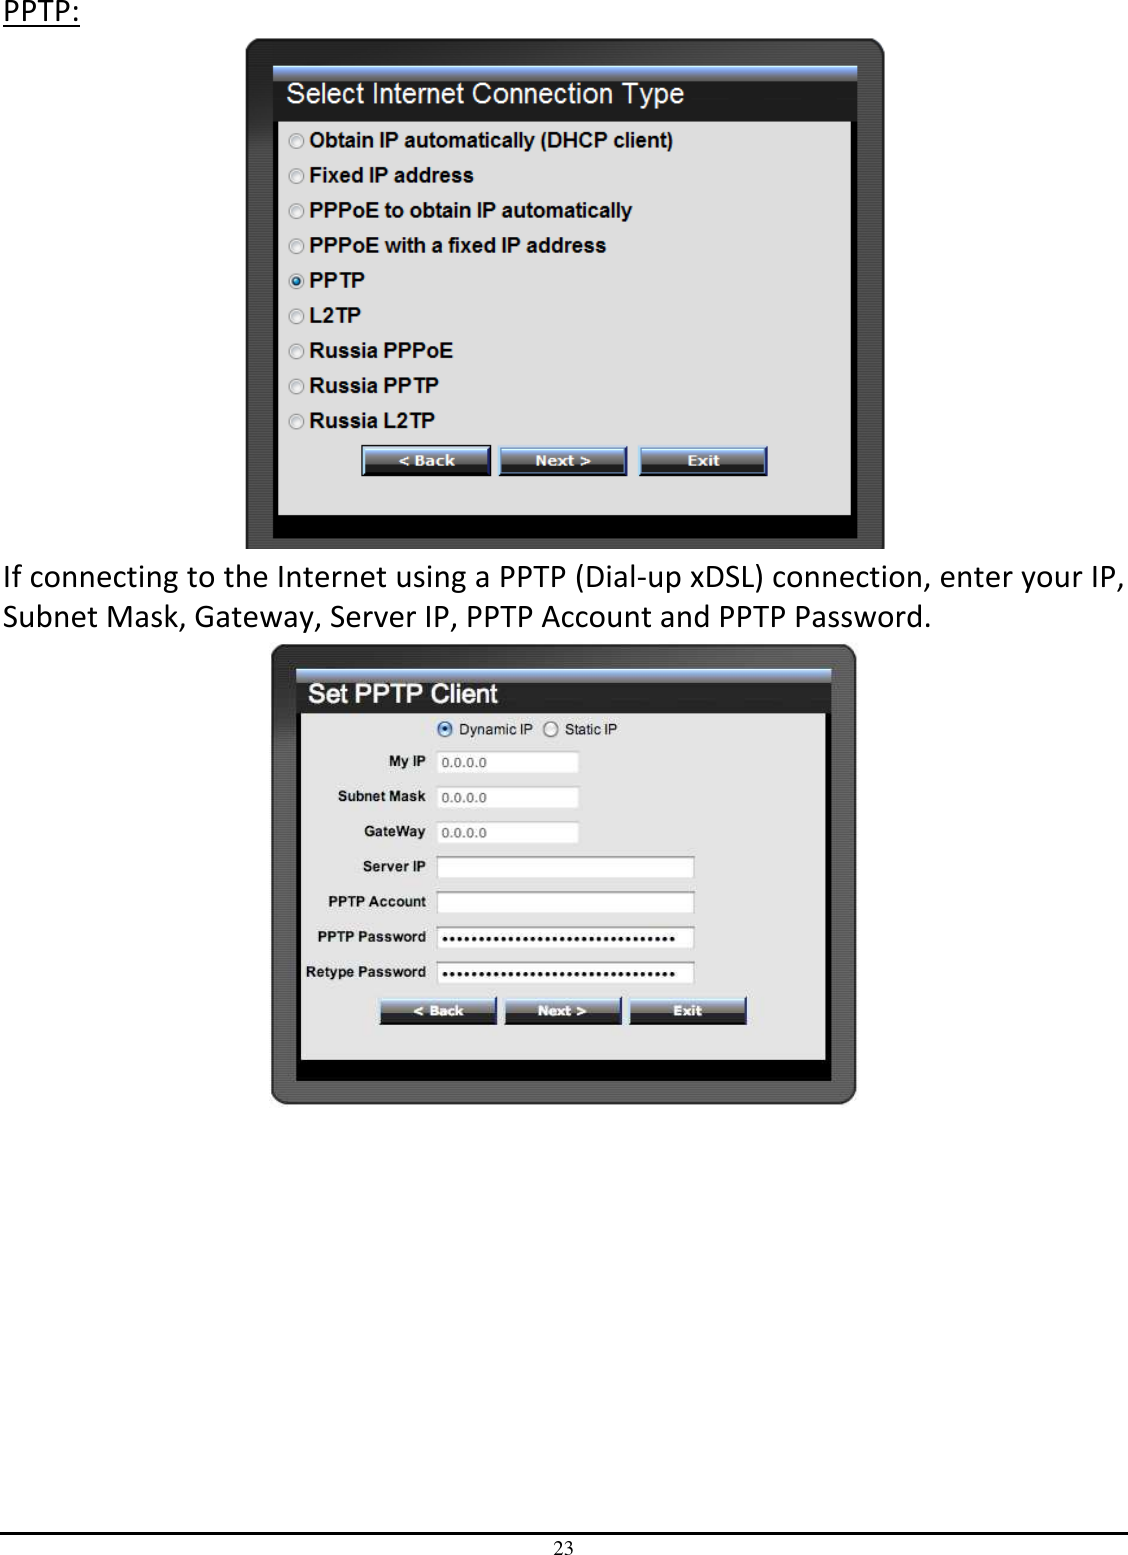 23 PPTP:  If connecting to the Internet using a PPTP (Dial-up xDSL) connection, enter your IP, Subnet Mask, Gateway, Server IP, PPTP Account and PPTP Password.    